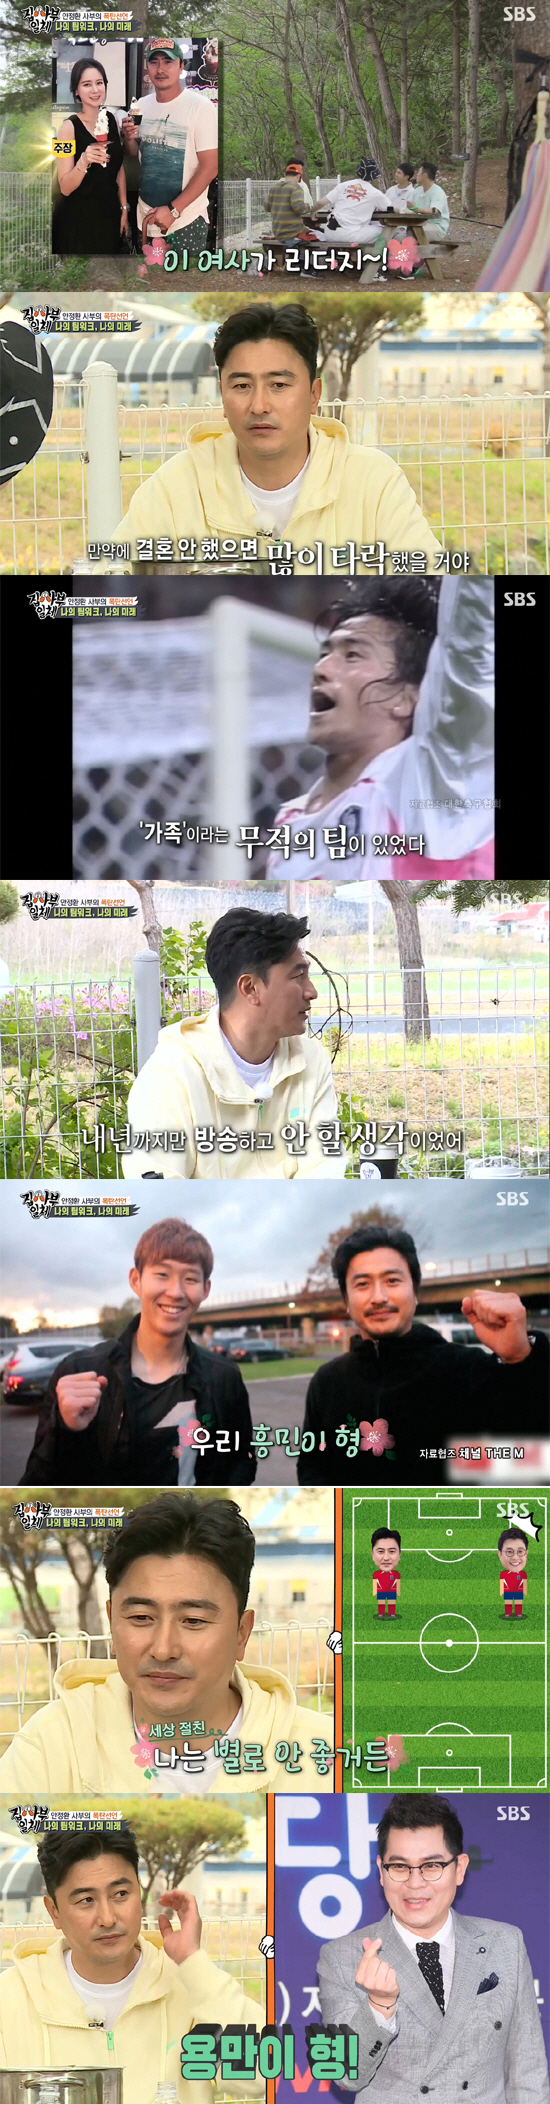 My home leader is wife Lee Hee-won, the best teamwork is family.Footballer-turned-broadcaster Ahn Jung-hwan stressed that the best teamwork is family.In SBS All The Butlers broadcast on the 16th, Ahn Jung-hwan appeared as master after last week and emphasized the original team.Ahn Jung-hwan said: Family life is a teamwork. Dad can be a leader, and mom can be a leader.It is also a team, he said, asking the leader of the Ahn Jung-hwan family, saying, Of course it is this woman. Ahn Jung-hwan said: I changed because I did a lot of wrongs, and every strange thing I do, that position changes a lot. It keeps stacking up and it happens in an instant.I have changed so clearly that I do not know why I have become such a thing. I am glad that I married quickly.I am very excited if I was alone because I have a lot of temptations in my growing environment. He expressed his gratitude for his wife by writing the word Twisted Justice several times.Asked about the direction of Ahn Jung-hwan going forward, he said, I was going to broadcast it only next year and not do it.Ahn Jung-hwan said: Once you think so, Im going back to football. Im going to study. Its not set. My plan is.Whether you are a leader or a student, the plan is once so. The production team was surprised by the sudden remarks of Ahn Jung-hwan and took the camera again.Lee Seung-gi wondered, You are so active, but next year it is too fast. Ahn Jung-hwan said, I am broadcasting now and suddenly I can not stop.Its damaging. Im trying to tell someone. Im better than you guys, not football.I can not give a smile more than Sehyung, I am better than Jung Eun-woo, I am better at fighting than Kim Dong-Hyun, I am not better at acting and singing than Lee Seung-gi On the day, Ahn Jung-hwan said, The first impression was not good, but unexpectedly good person and There is no reason why people do not like it.I really wanted to be in love with me, he said honestly. But The more you know, the more you know.I really respect you. He nursed Jin Yongman, who was sick when he traveled on the air, and told me about the process of getting closer because of the time he helped me to use the room together.Yongman was sick, because I was a player, so I took care of him and slept with him in the hot air, and later I was really grateful for that part, said Ahn Jung-hwan.Lee Seung-gi said, There are many sports stars in Korea, but there is a tremendous star with the name of Ahn Jung-hwan. Master Ahn Jung-hwan is not a hero.Its not Hero, he said, squeezing.I have a different relationship with Park Ji-sung, but when Park Ji-sung is Hero, Ahn Jung-hwan is a star. Ahn Jung-hwan said, Who does not heal?Why did I come out and pick up Park Ji-sung? Kim Kwang-hyung tried to appease Ahn Jung-hwan with an additional explanation, but eventually Jung Eun-woo succeeded.The cooler footballer than Ronaldo Messi is Ahn Jung-hwan, said Cha Jung Eun-woo, who caused Ahn Jung-hwans smile.Ahn Jung-hwan said, I am a brother, and if you have more money than me, you are all older.Son Heung-min is also a brother, he said, To talk about Park Ji-sung, please invite Park Ji-sung On this day, Ahn Jung-hwan taught All The Butlers members the importance of teamwork by directing the mission to return and run all four in 20 seconds.I really hate to talk about 2002, he said. At that time, the aces of each team were sitting in the candidates seat.But no one on the candidates bench frowned; they became a real team, cheering and caring for each other.The national team was the original team then, but the peoples red demons became one true ones, both of which fit well, I think there were good results, Lee Seung-gi said.Ahn Jung-hwan started one-on-four football with left foot, members tied hands in hand; breaking expectations in the penalty shoot-out competition and returning to the victory of All The Butlers members.Ahn Jung-hwan praised the members cooperation, saying, There is no individual to beat the team.